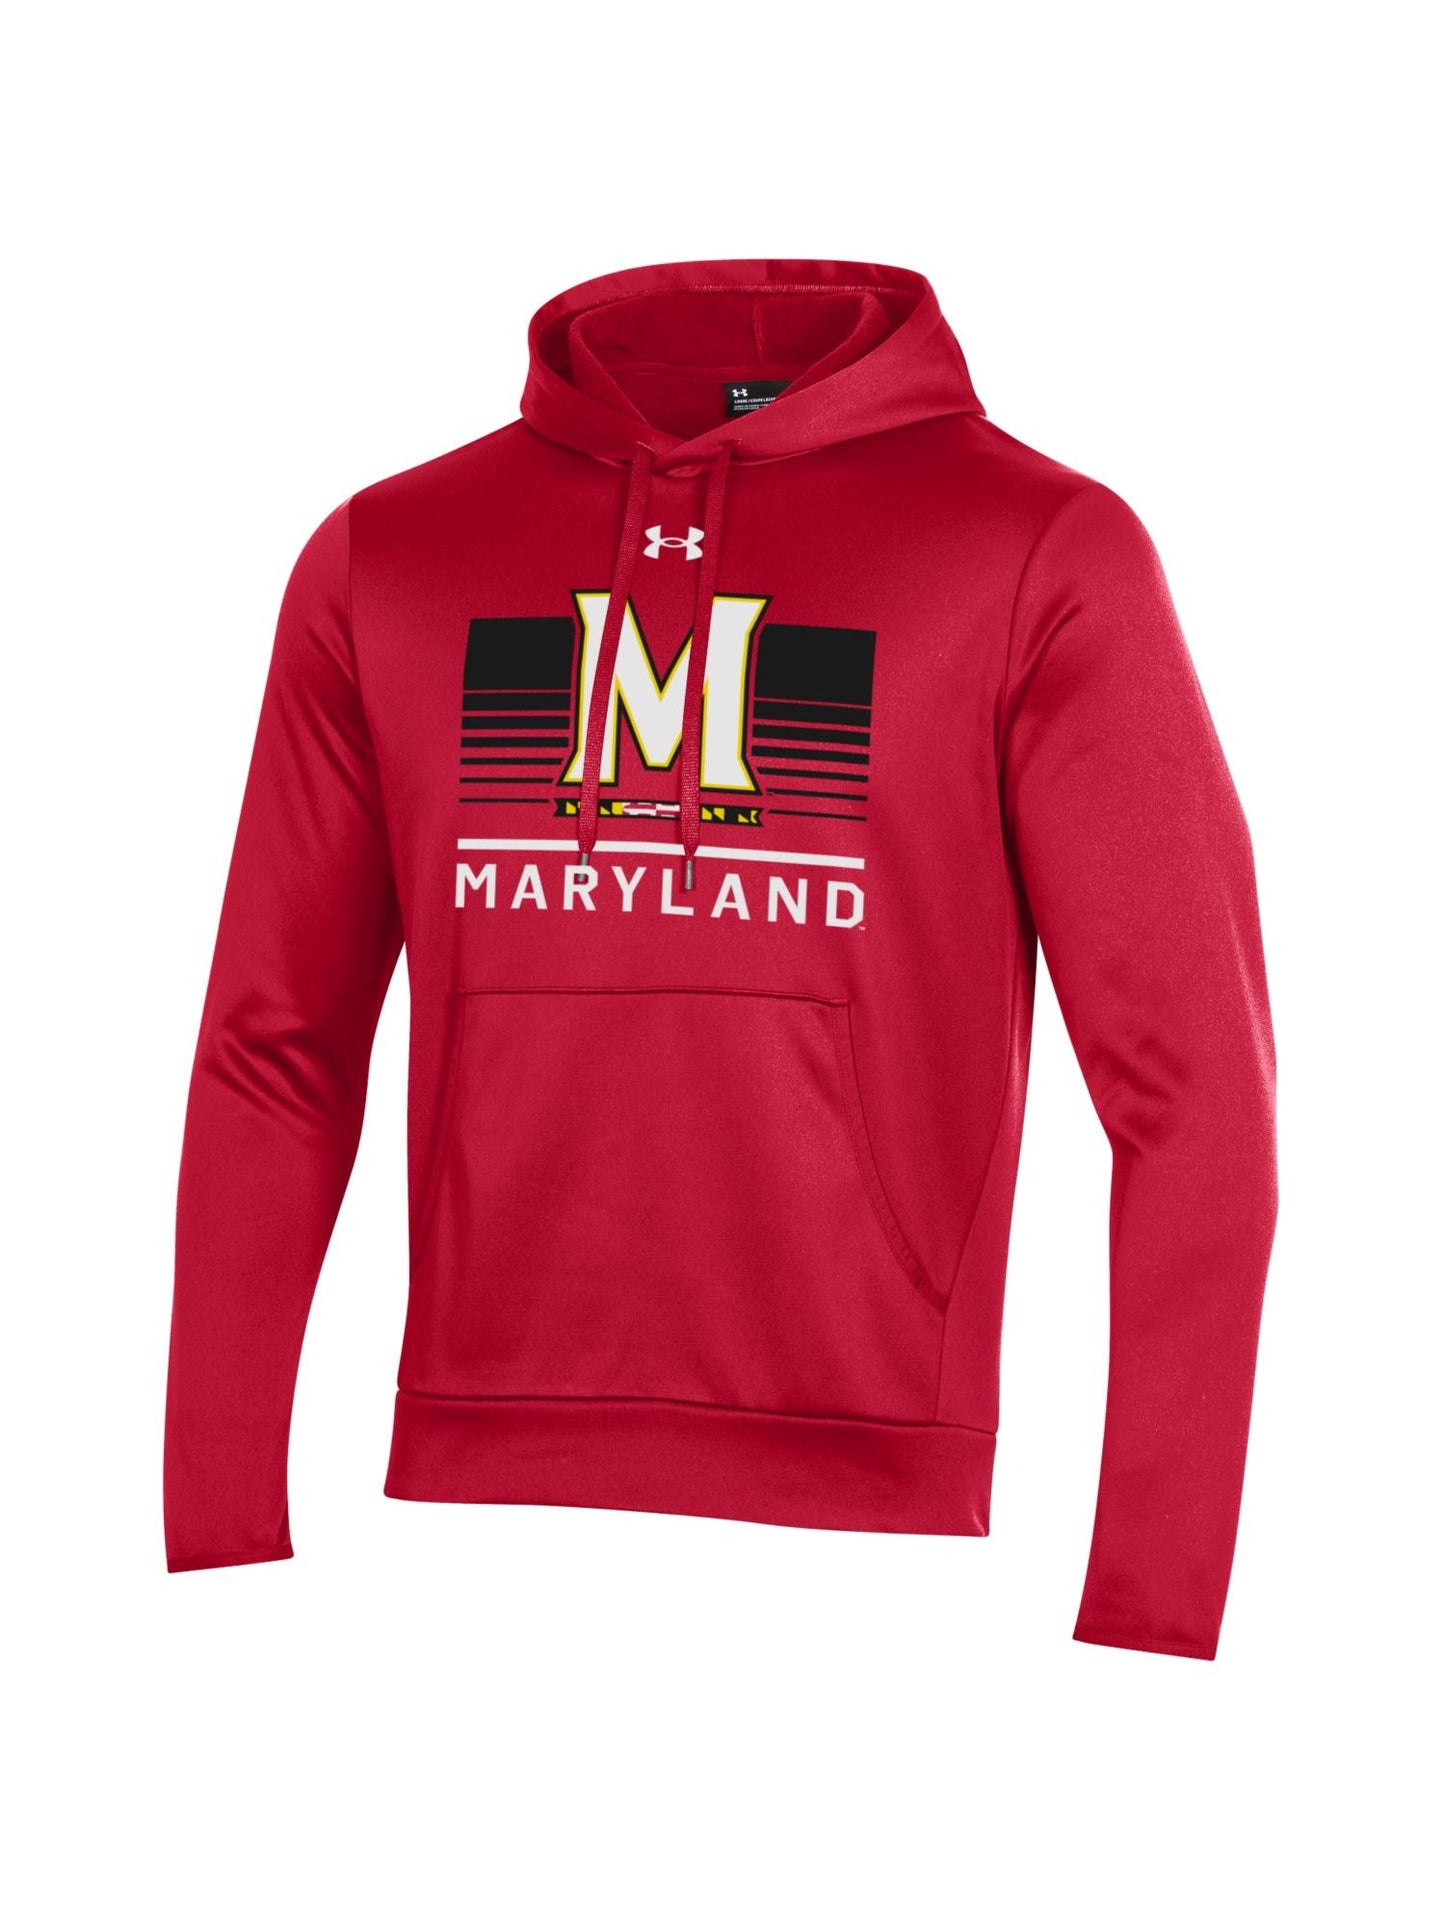 Under Armour University of Maryland Hoodie (Red)